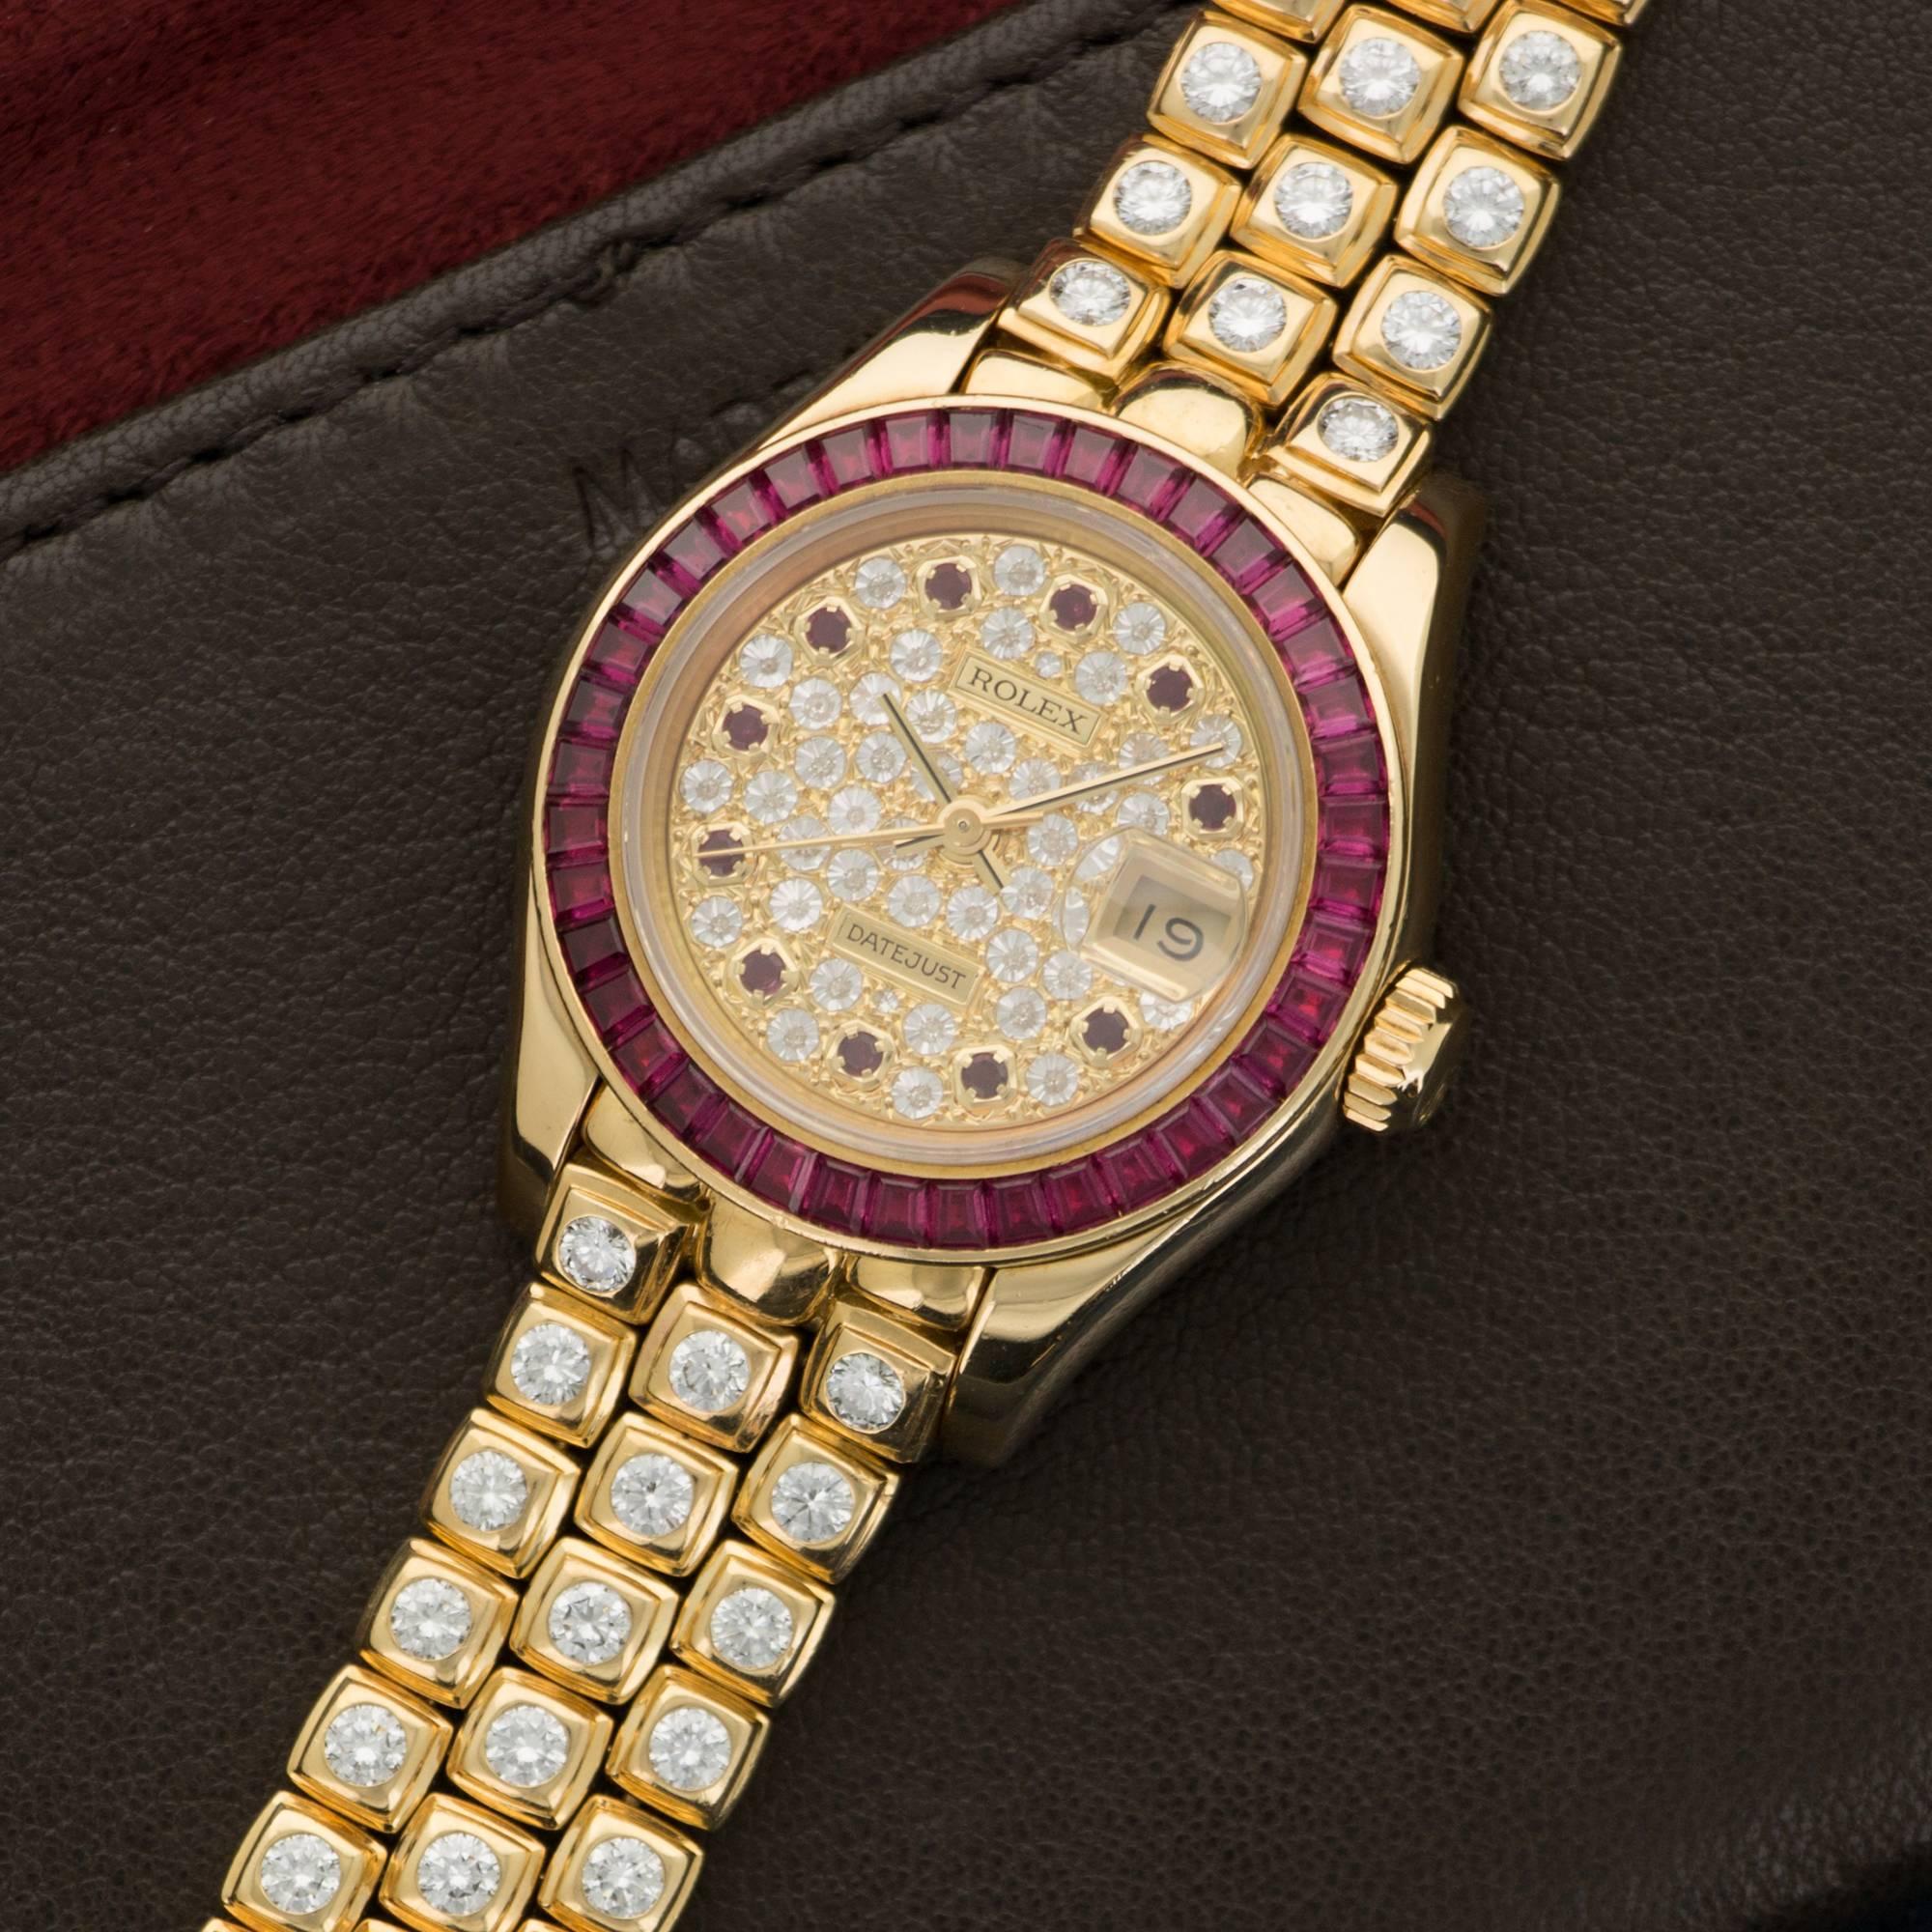 An Original and Stunning Rolex "Pearlmaster" in 18k Yellow Gold with Original Diamond Bracelet and Pave Dial with Square-Cut Ruby Bezel. Model Number 69308. 29mm Diameter. Circa 1990's Automatic Movement. All Original in Perfect Condition. 